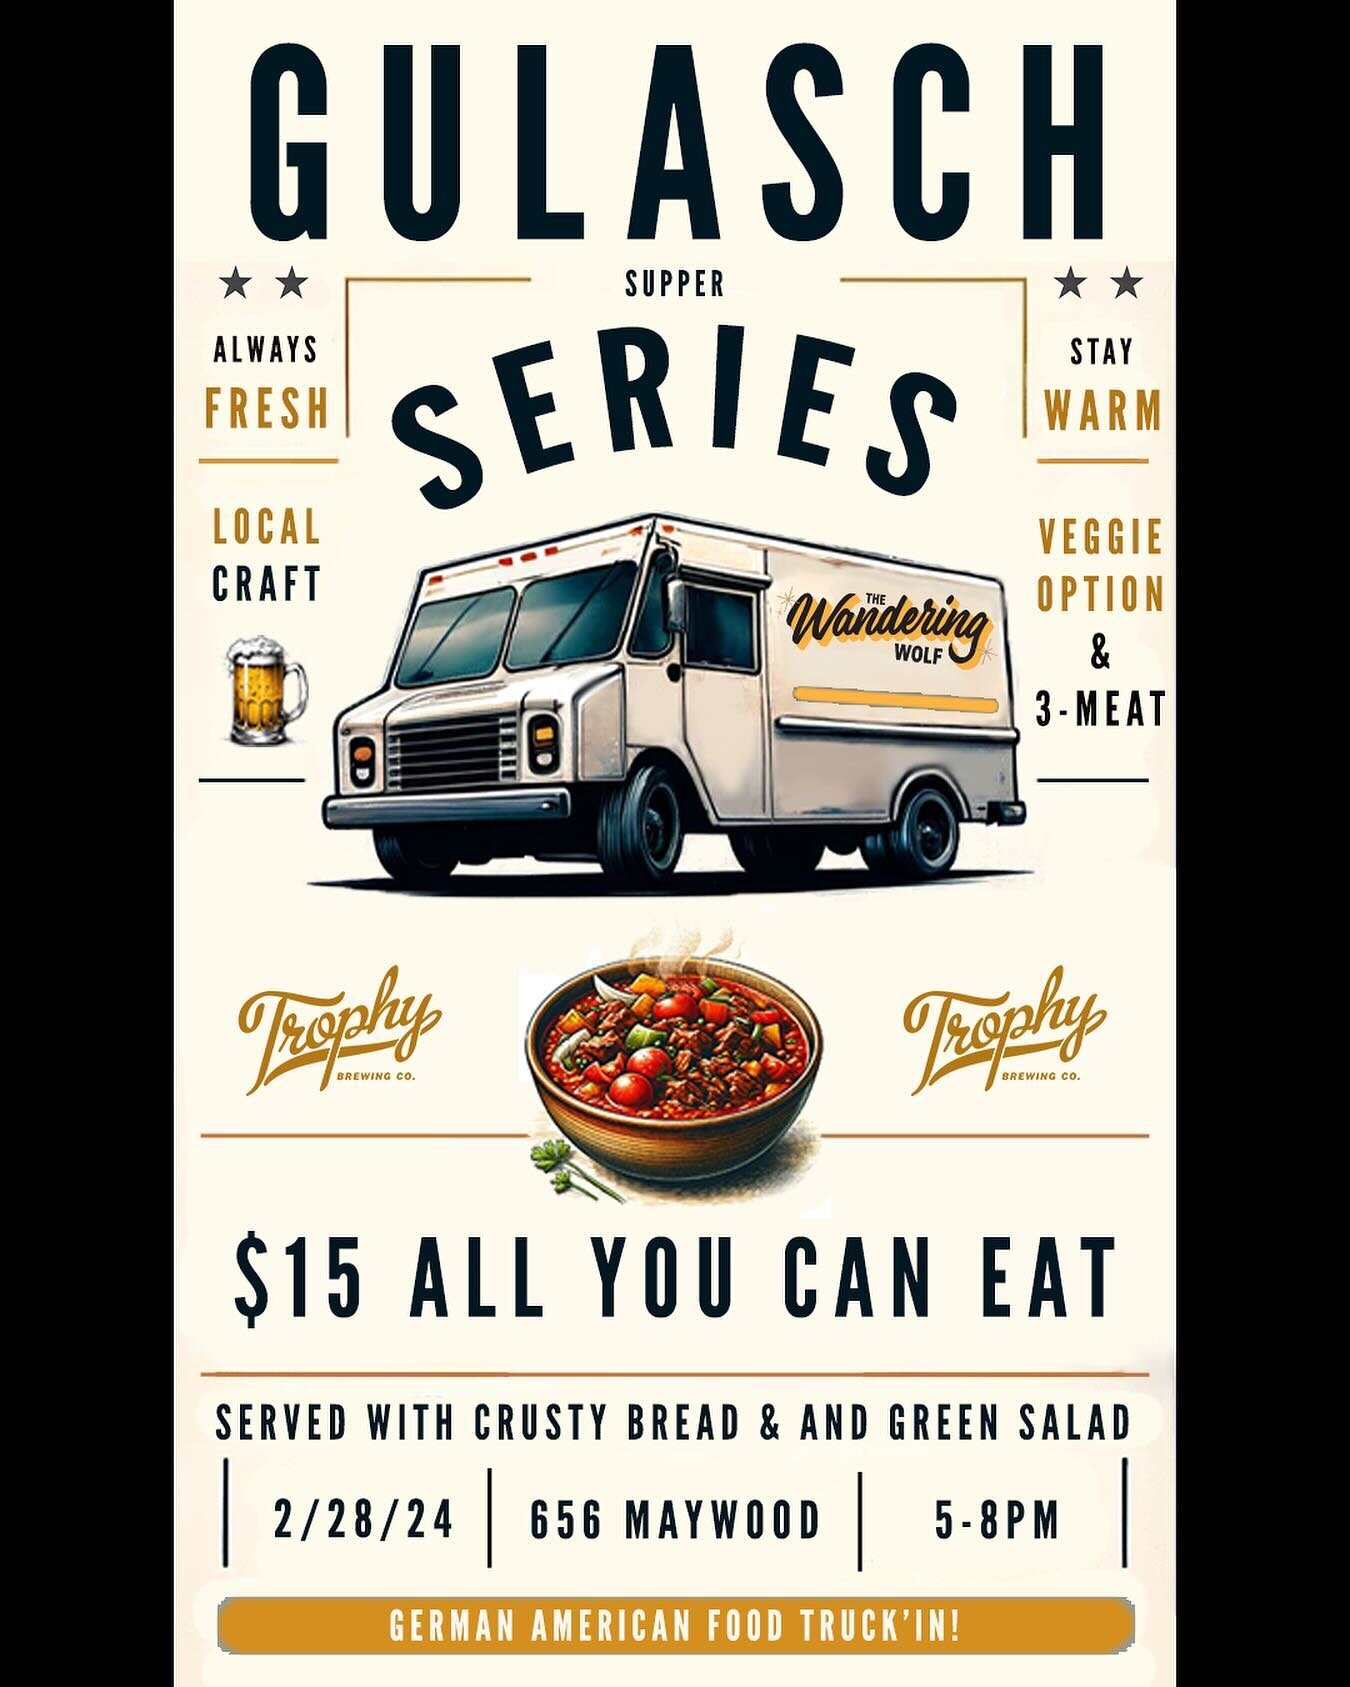 Come see the @wanderingwolf.nc on the second stop of the Gulasch Supper Series 2/28, 5-8pm @trophymaywood vegetarian and three meet options with crusty bread and green salad, $15. All paired with some great Trophy brews. 

#foodtruck 
#germanfoodtruc